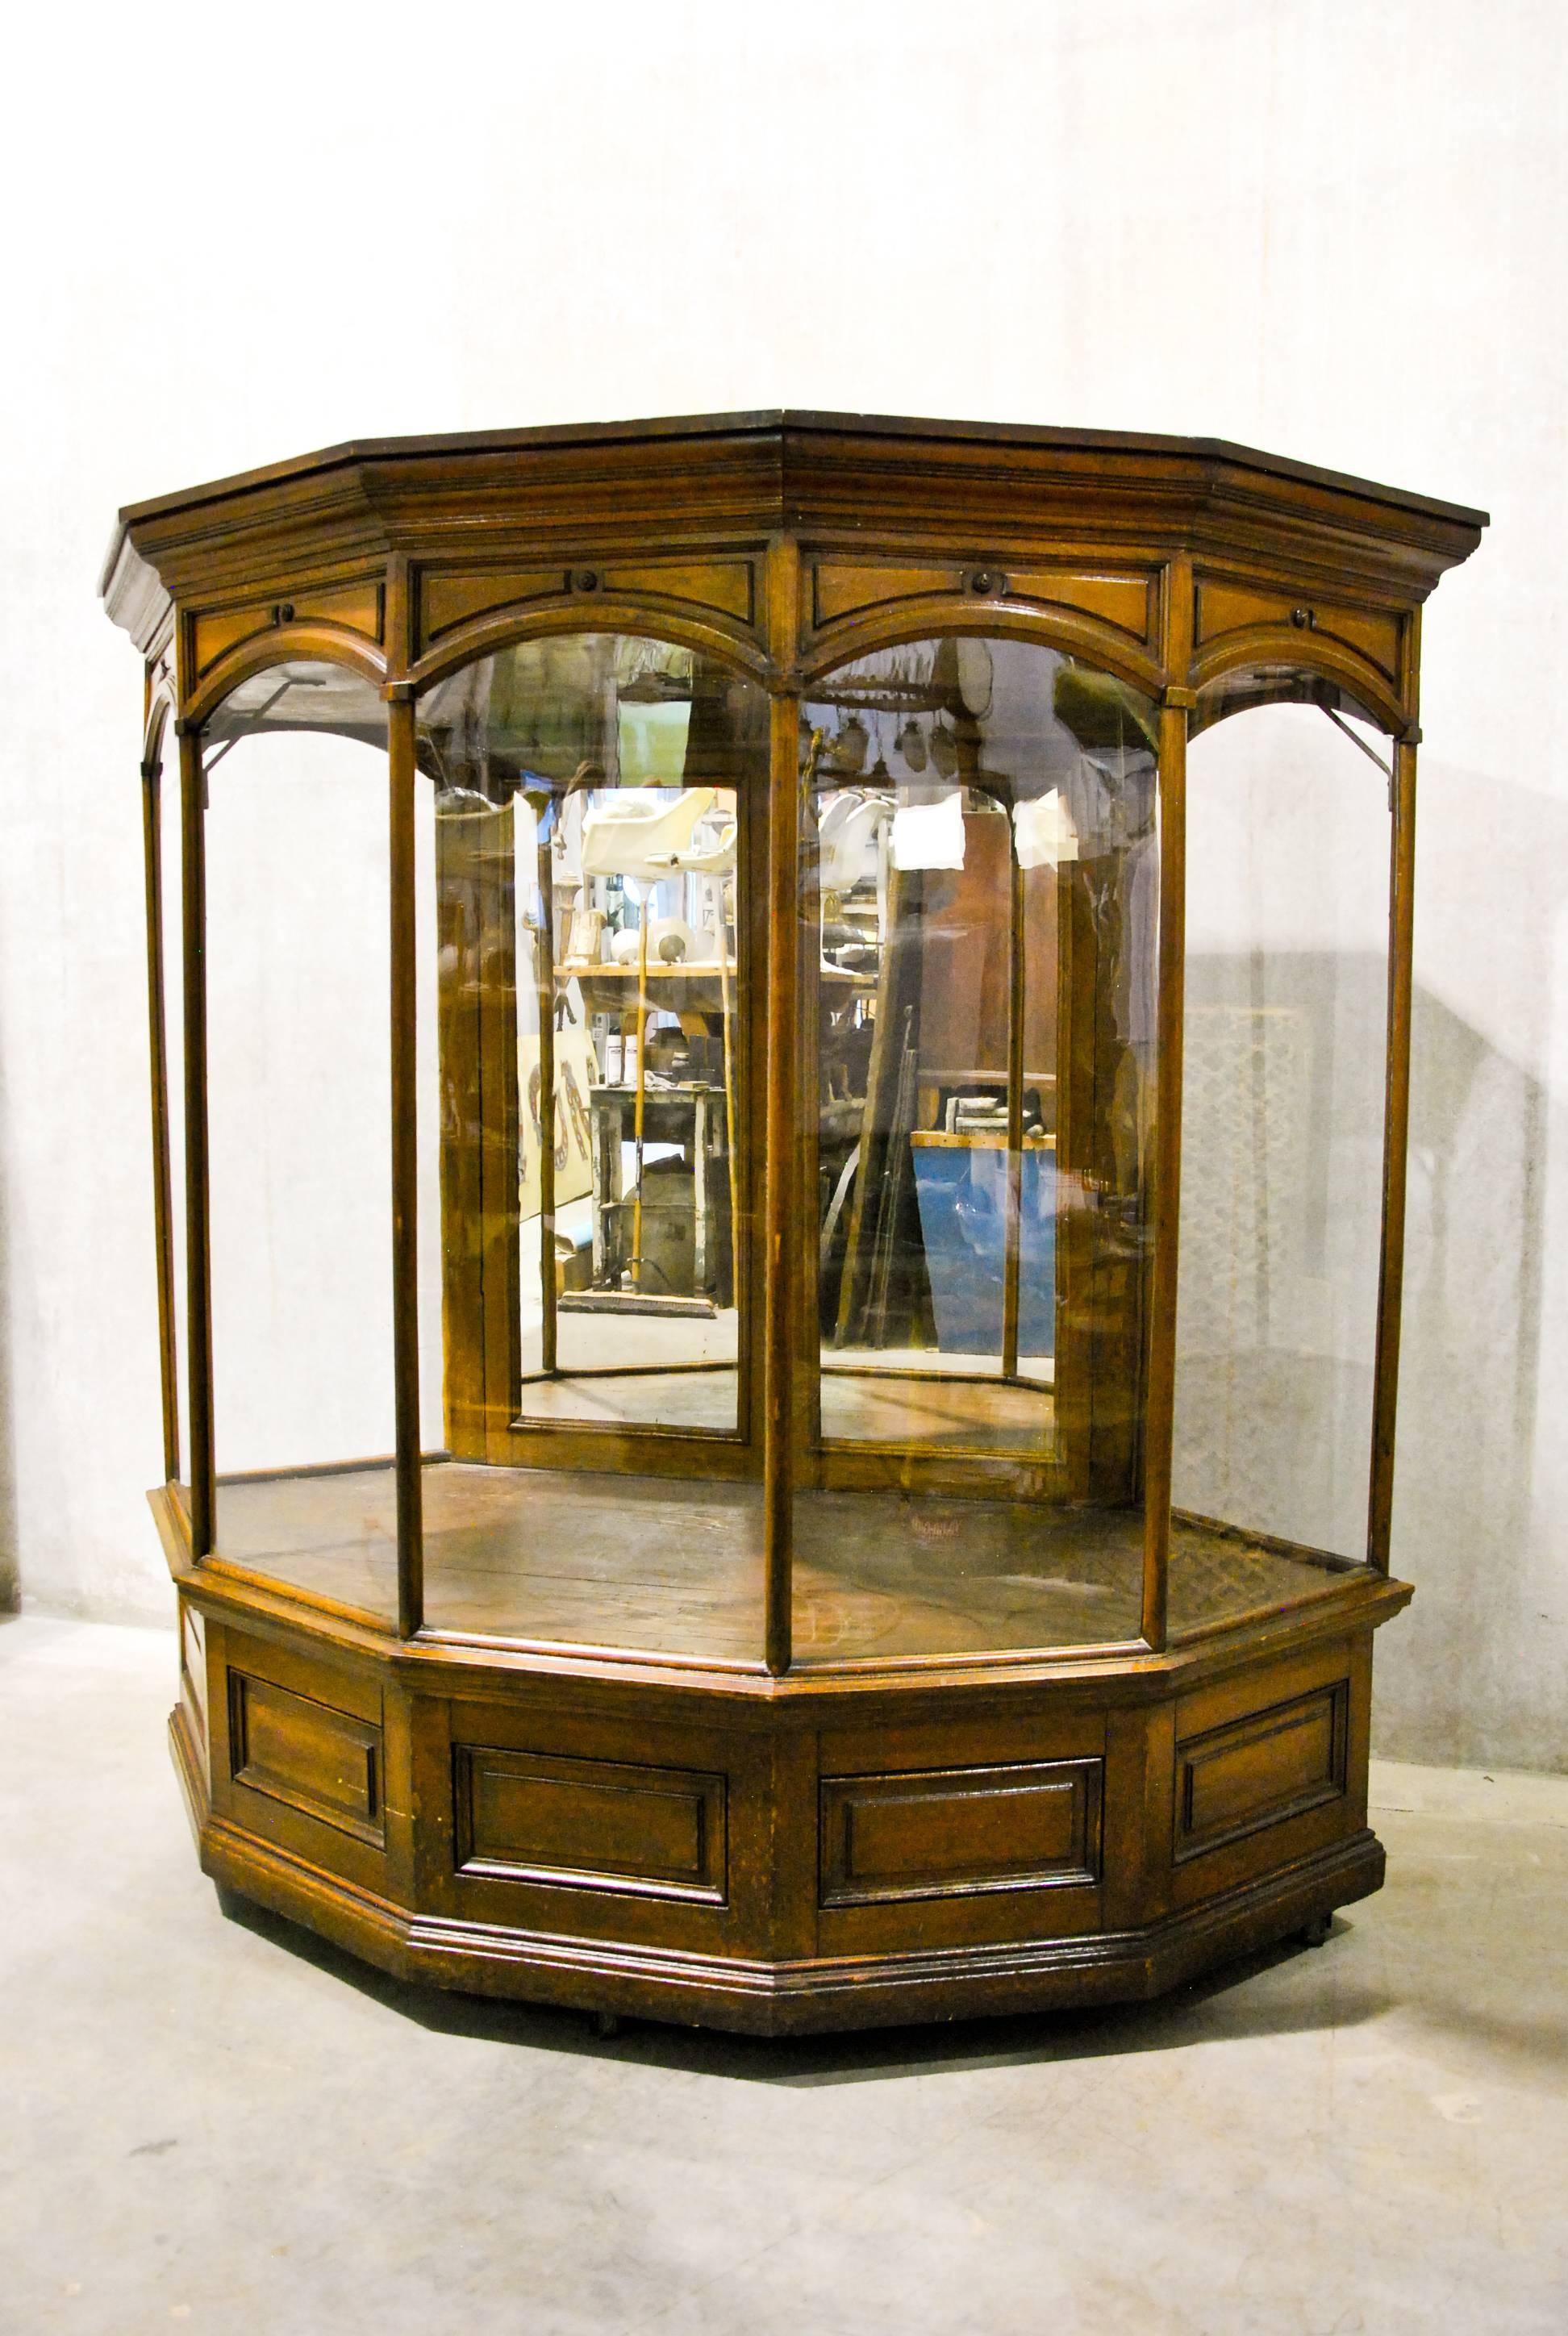 Rare, high quality oak-and-glass Victorian-era showcase with interior lighting. Original, untouched finish and absolutely one-of-a-kind. Once believed to be part of a store display for Smith and Wesson. This unique piece could house incredible